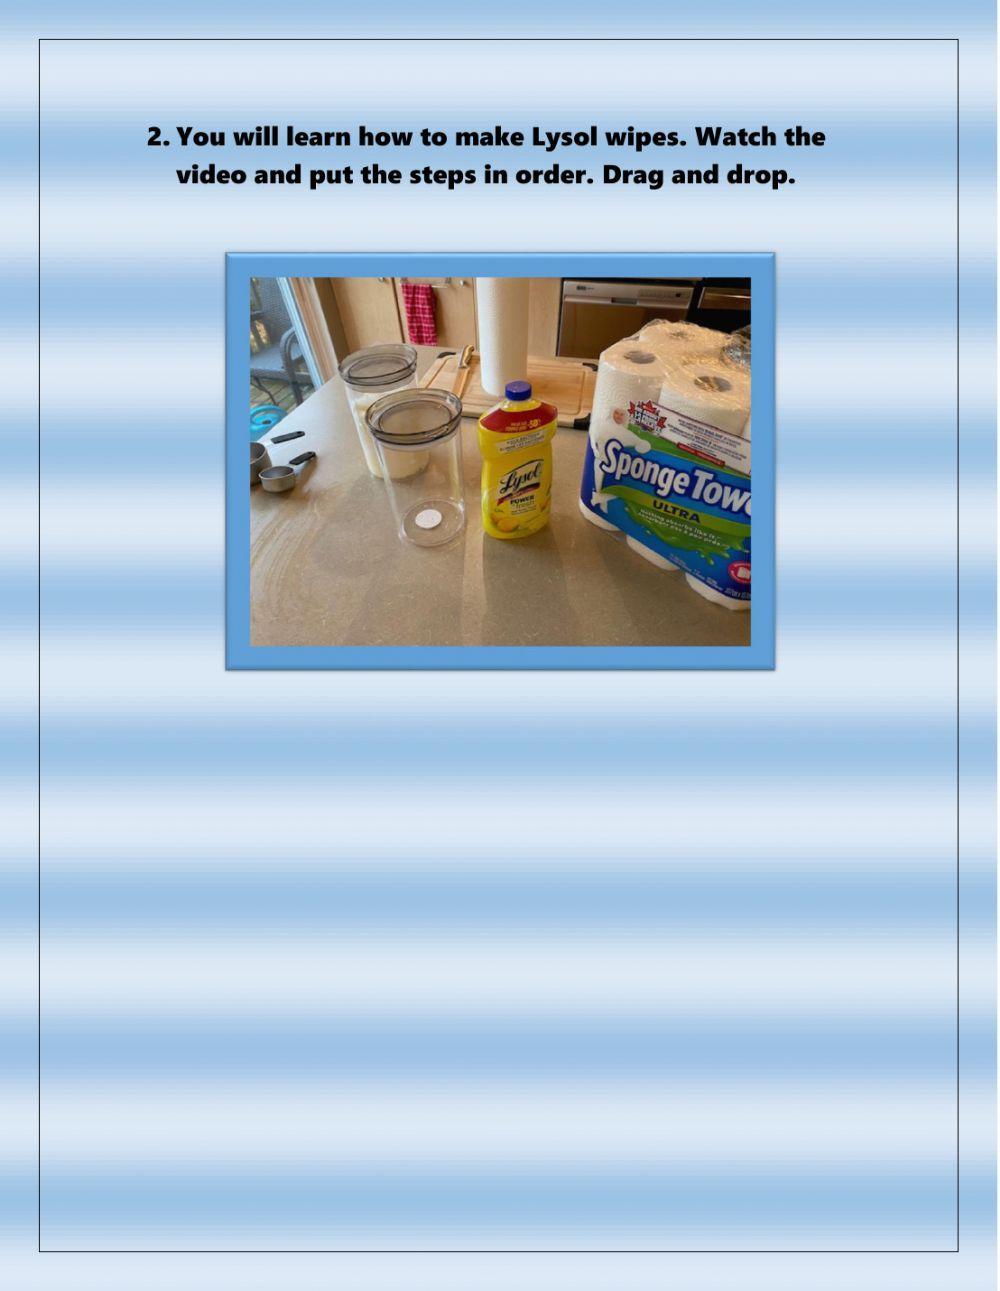 How to make Lysol wipes at home